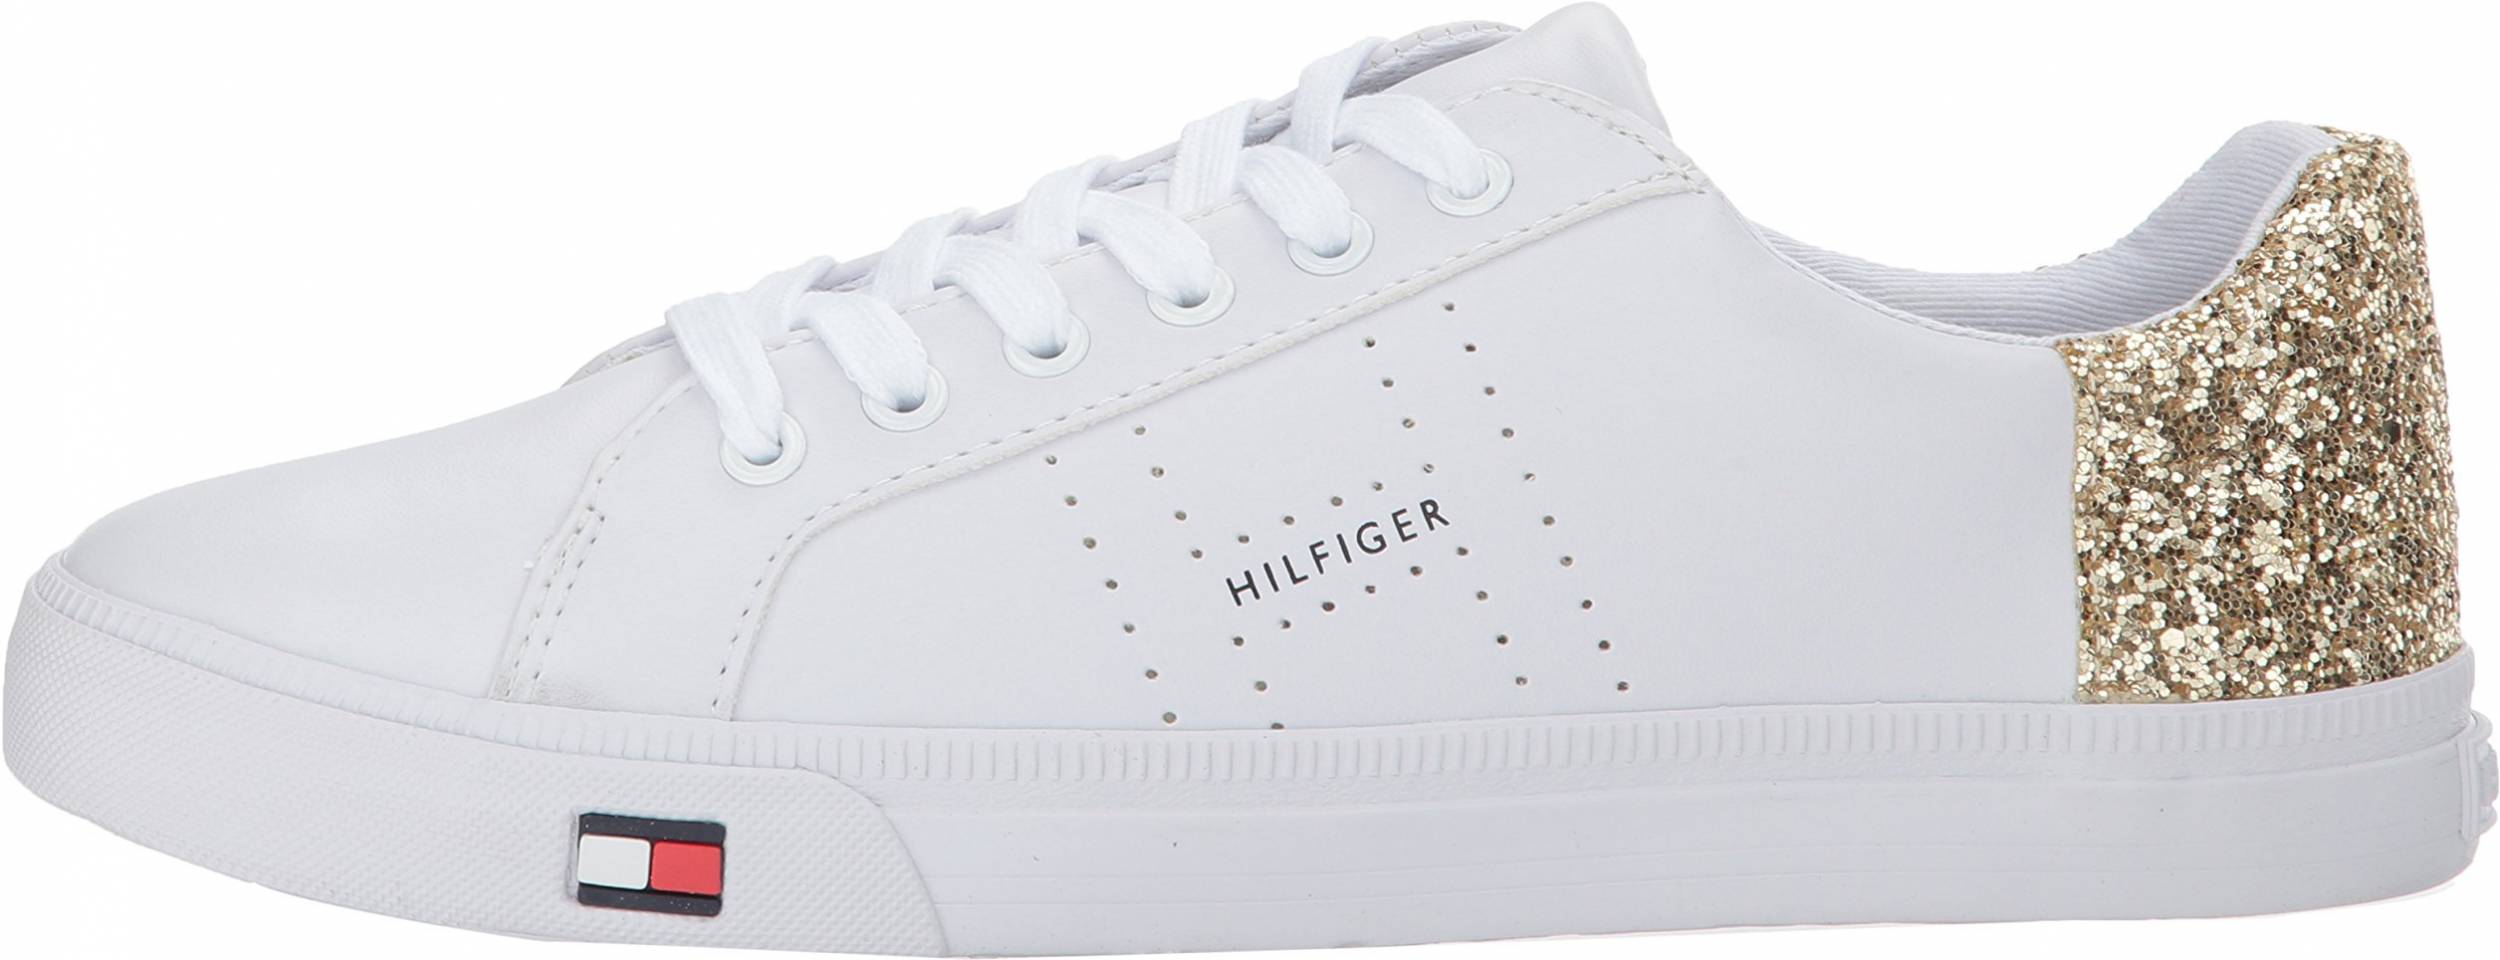 tommy hilfiger tennis shoes